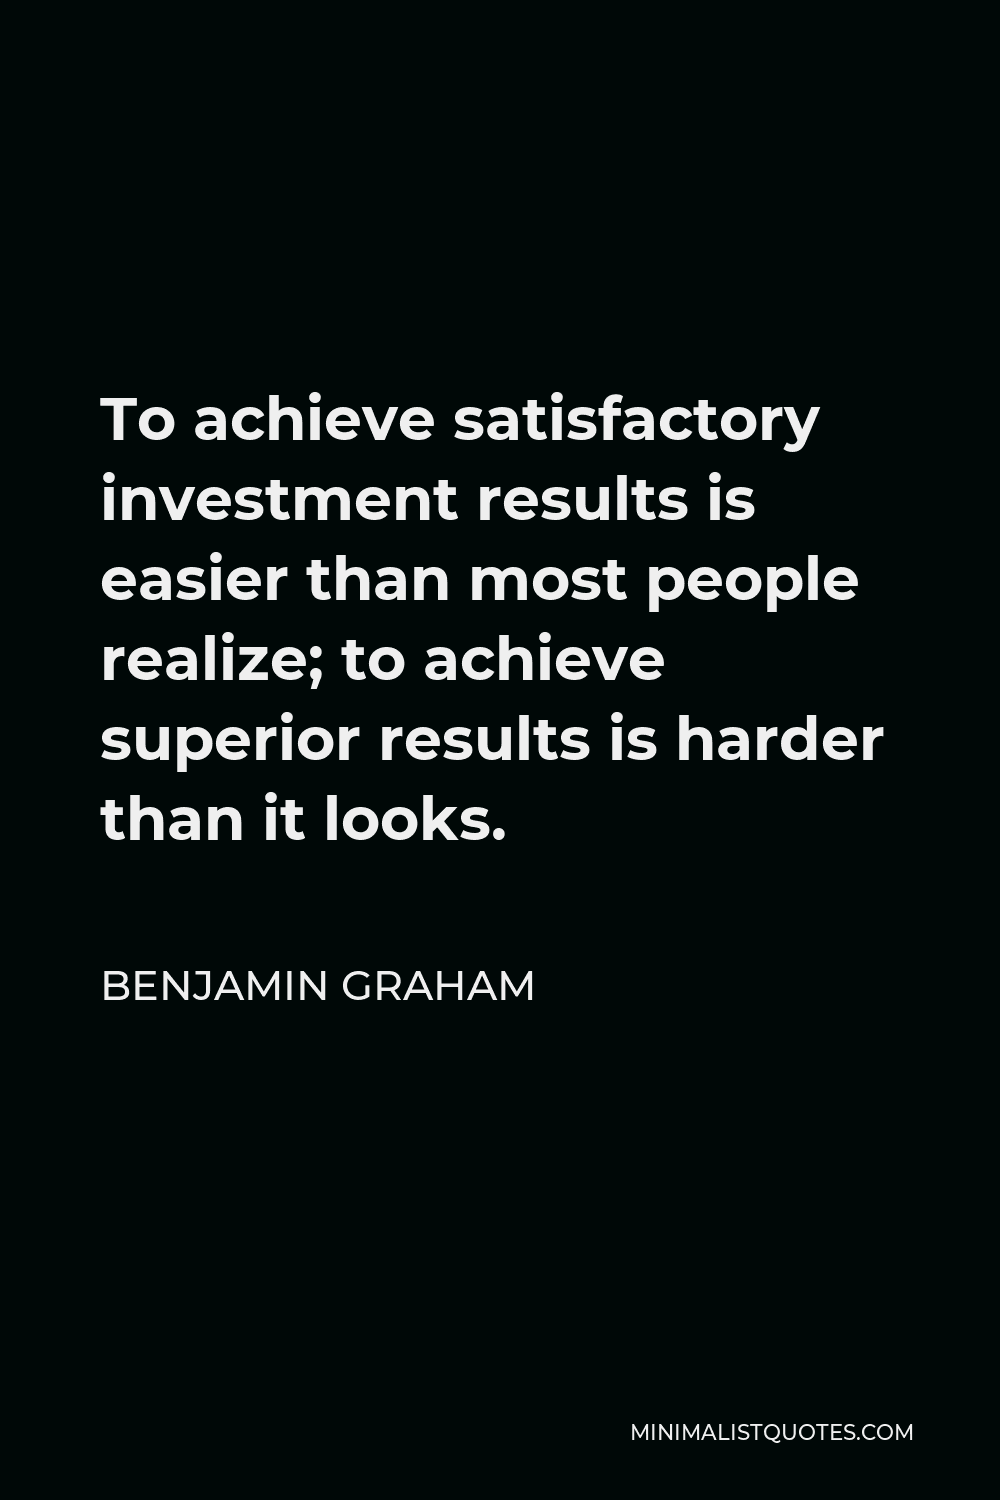 Benjamin Graham Quote - To achieve satisfactory investment results is easier than most people realize; to achieve superior results is harder than it looks.